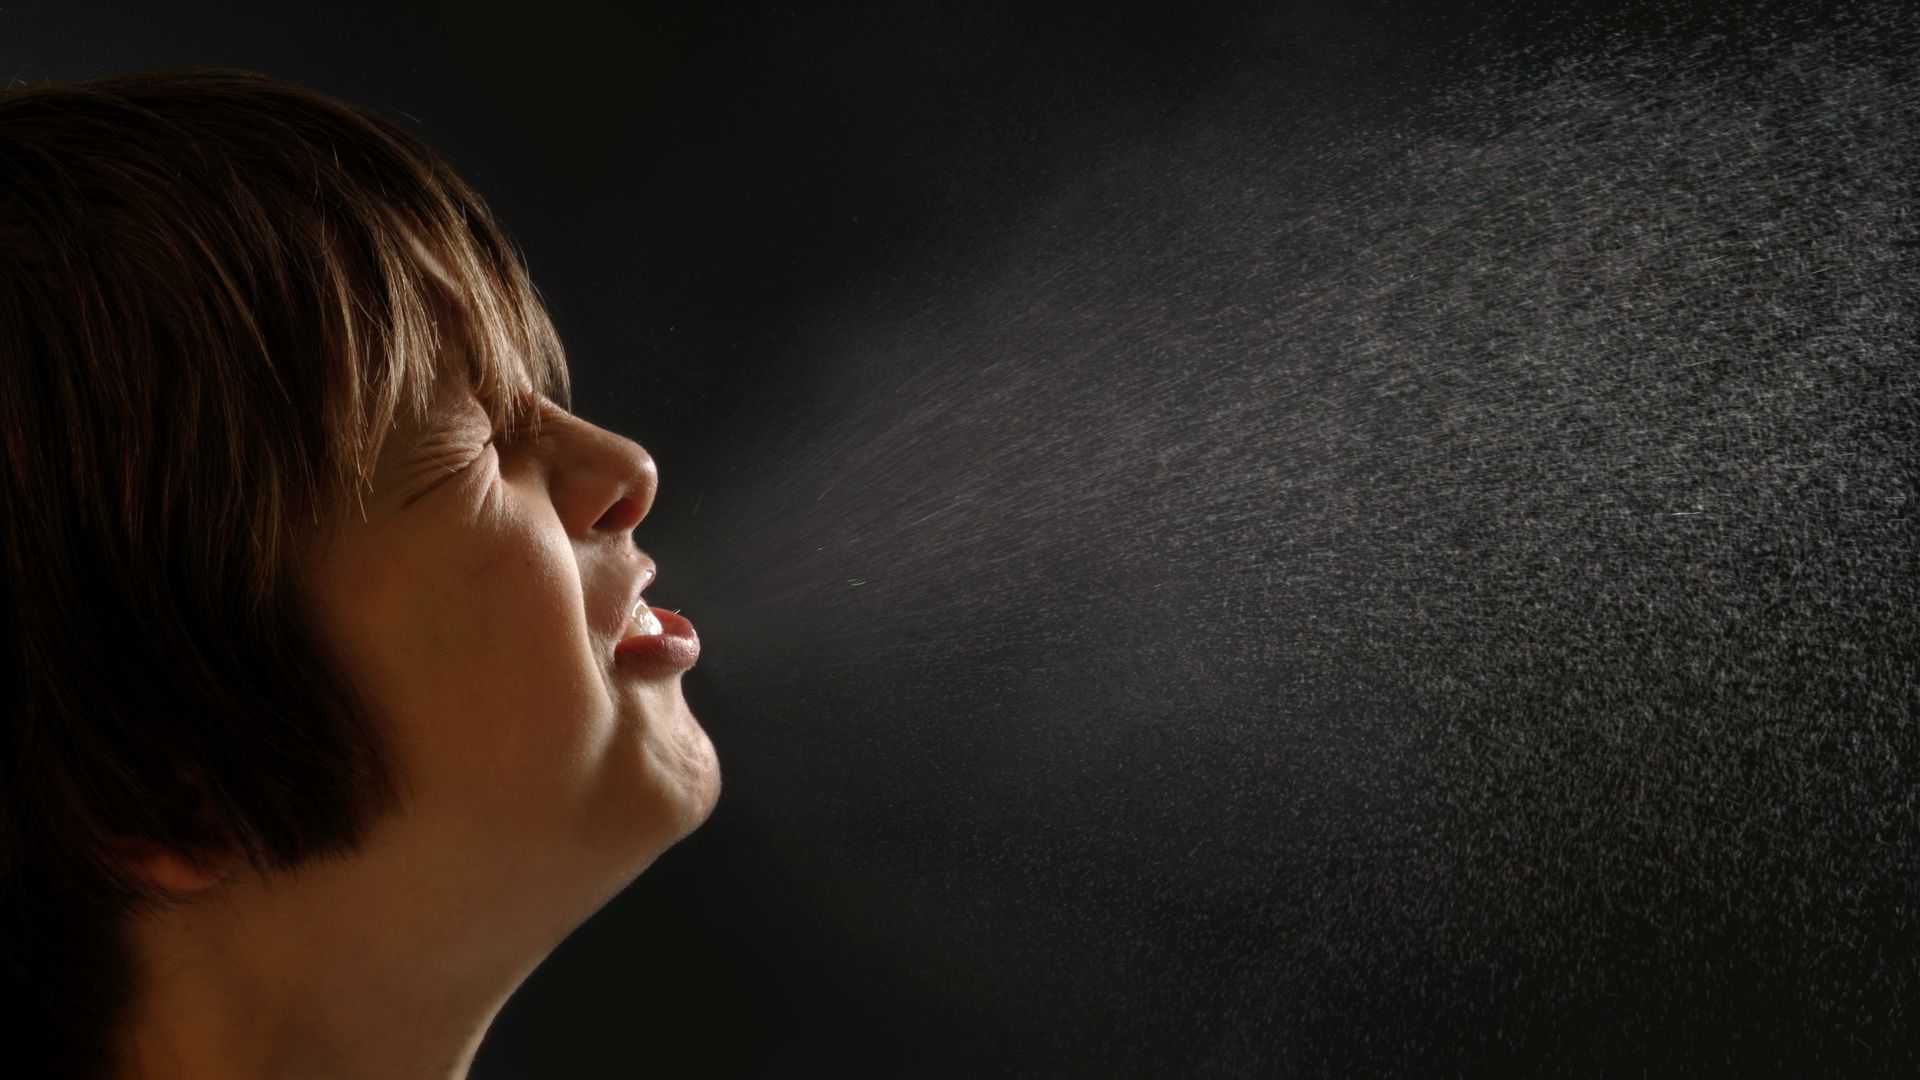 Boy sneezing with droplets highlighted in the air